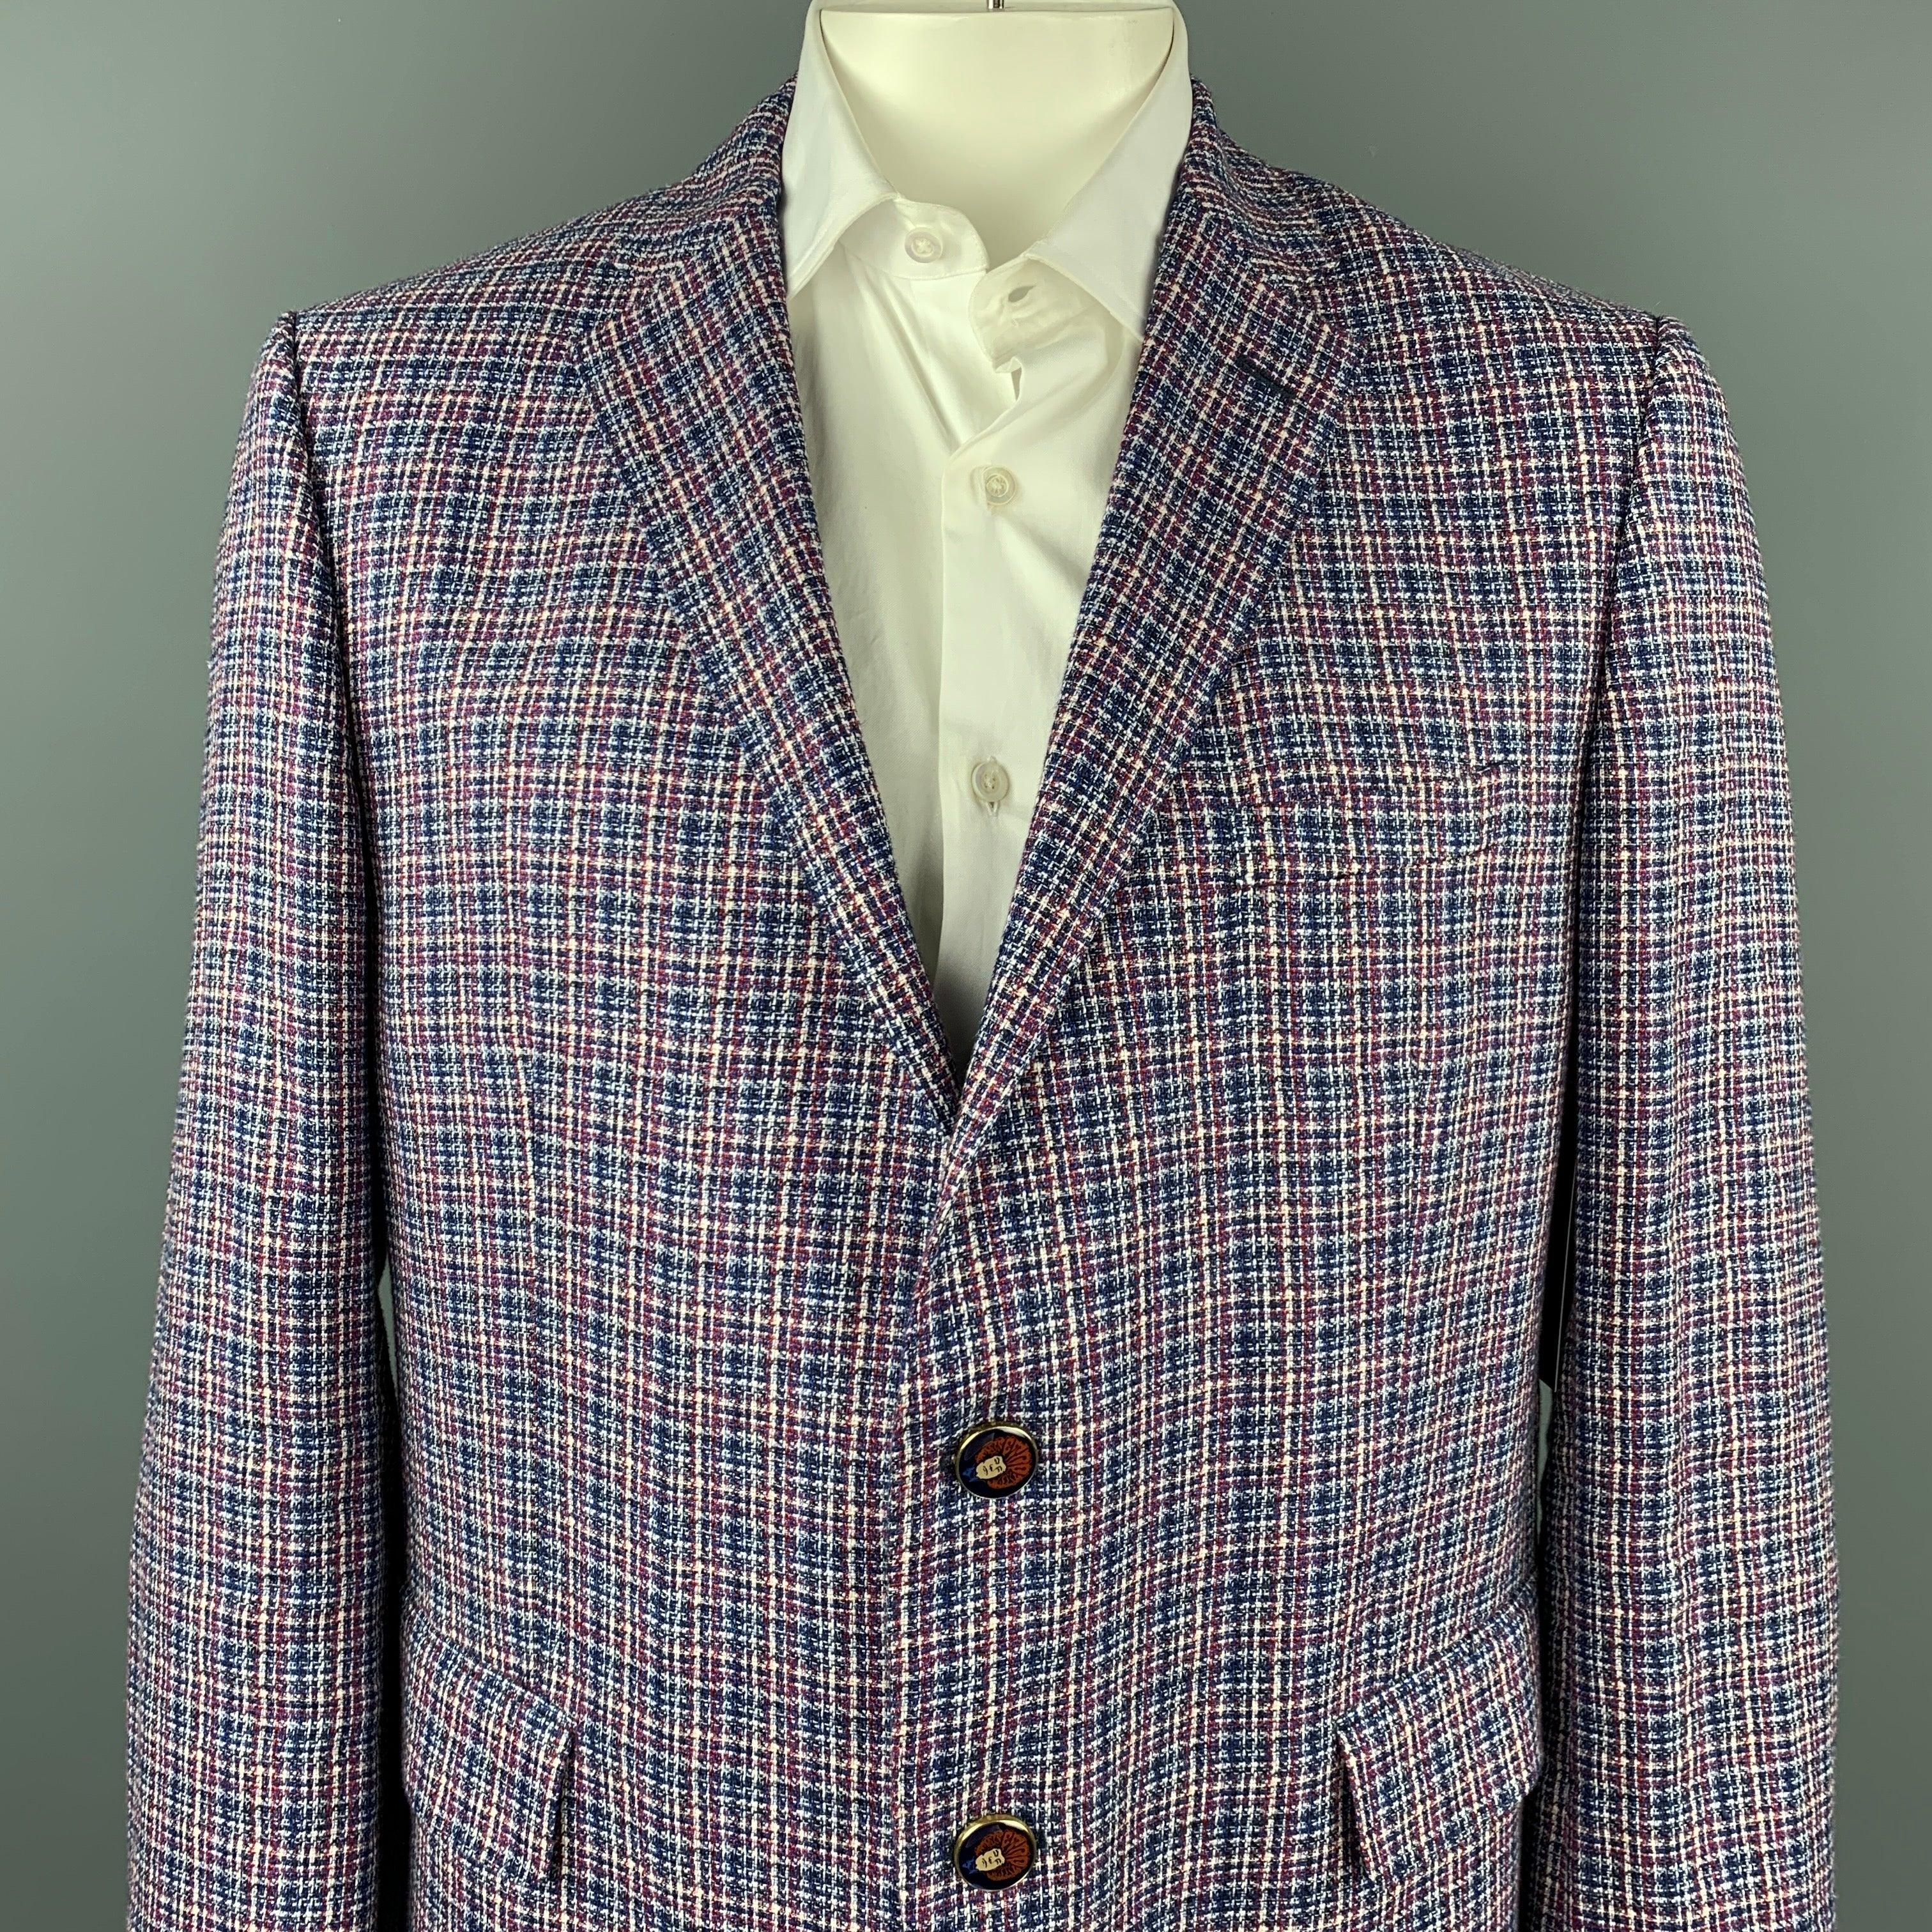 ETRO sport coat comes in a blue & red plaid hemp blend with a full abstract print liner featuring a notch lapel, flap pockets, and a two button closure. Made in Italy.Very Good
Pre-Owned Condition. 

Marked:   IT 58 

Measurements: 
 
Shoulder: 18.5